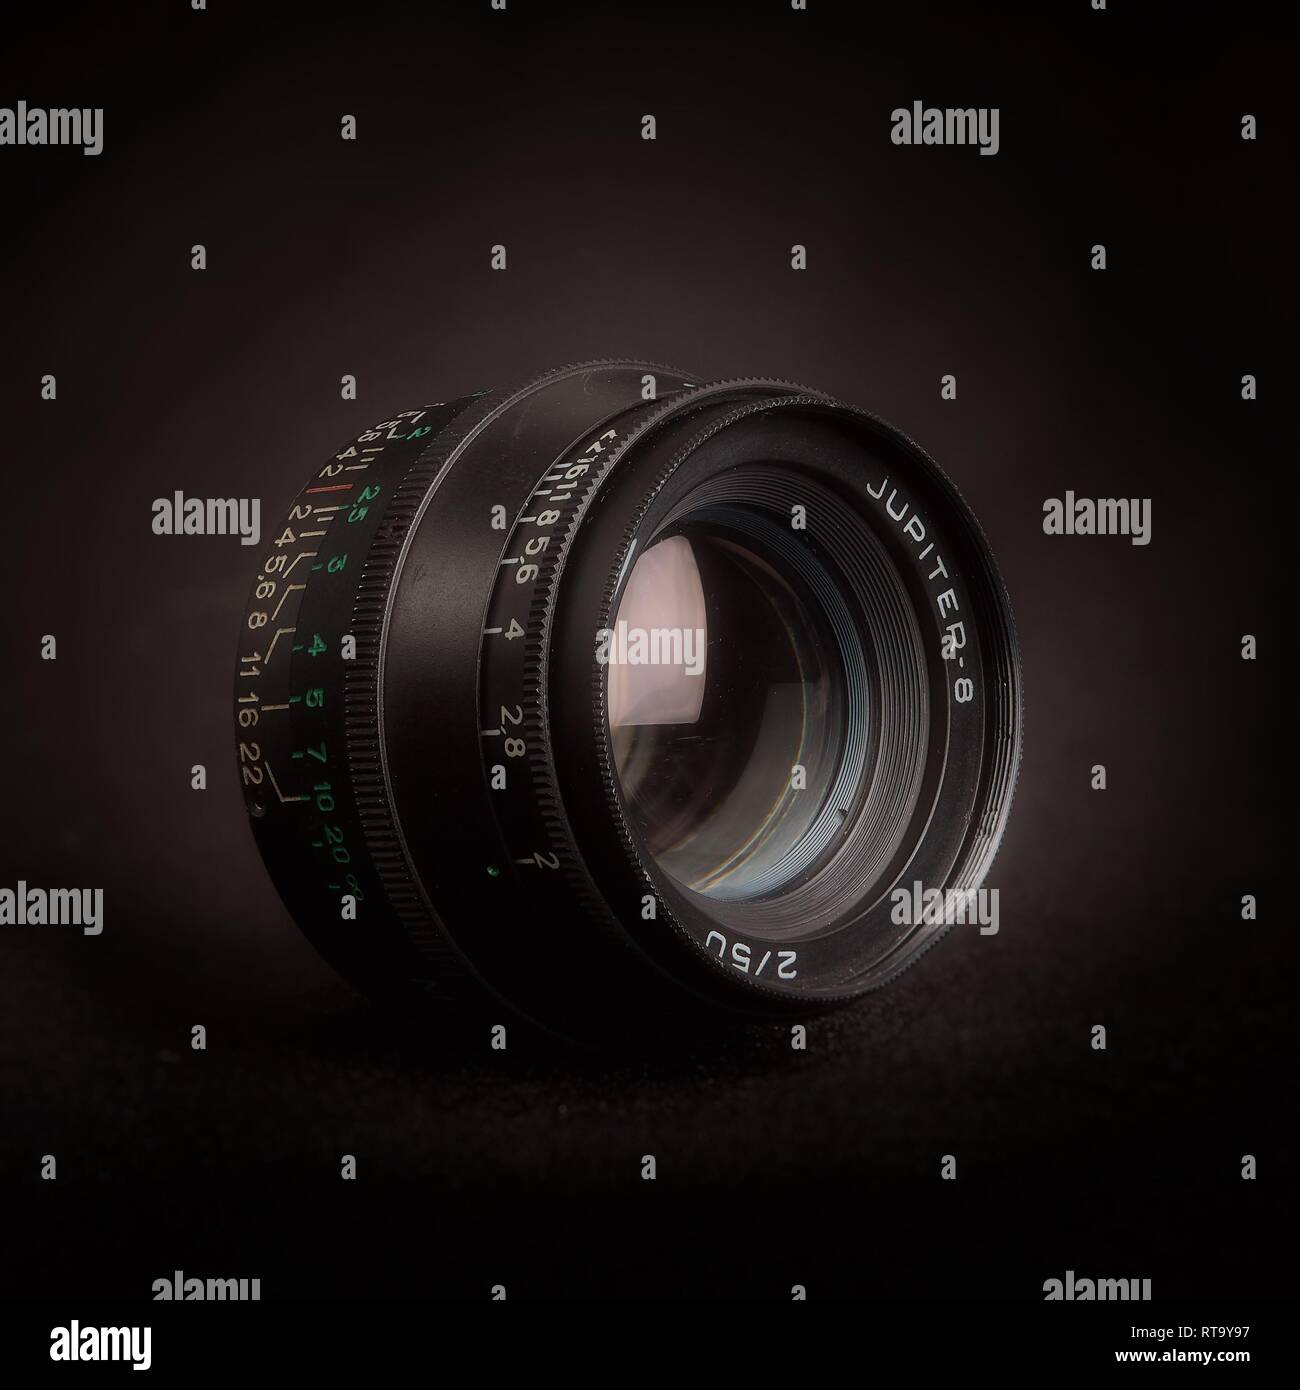 Essex, UK - 2/28/2019 : Russian manufactured 50mm Jupiter 8 lens with an M39 mount against a dark background. Stock Photo